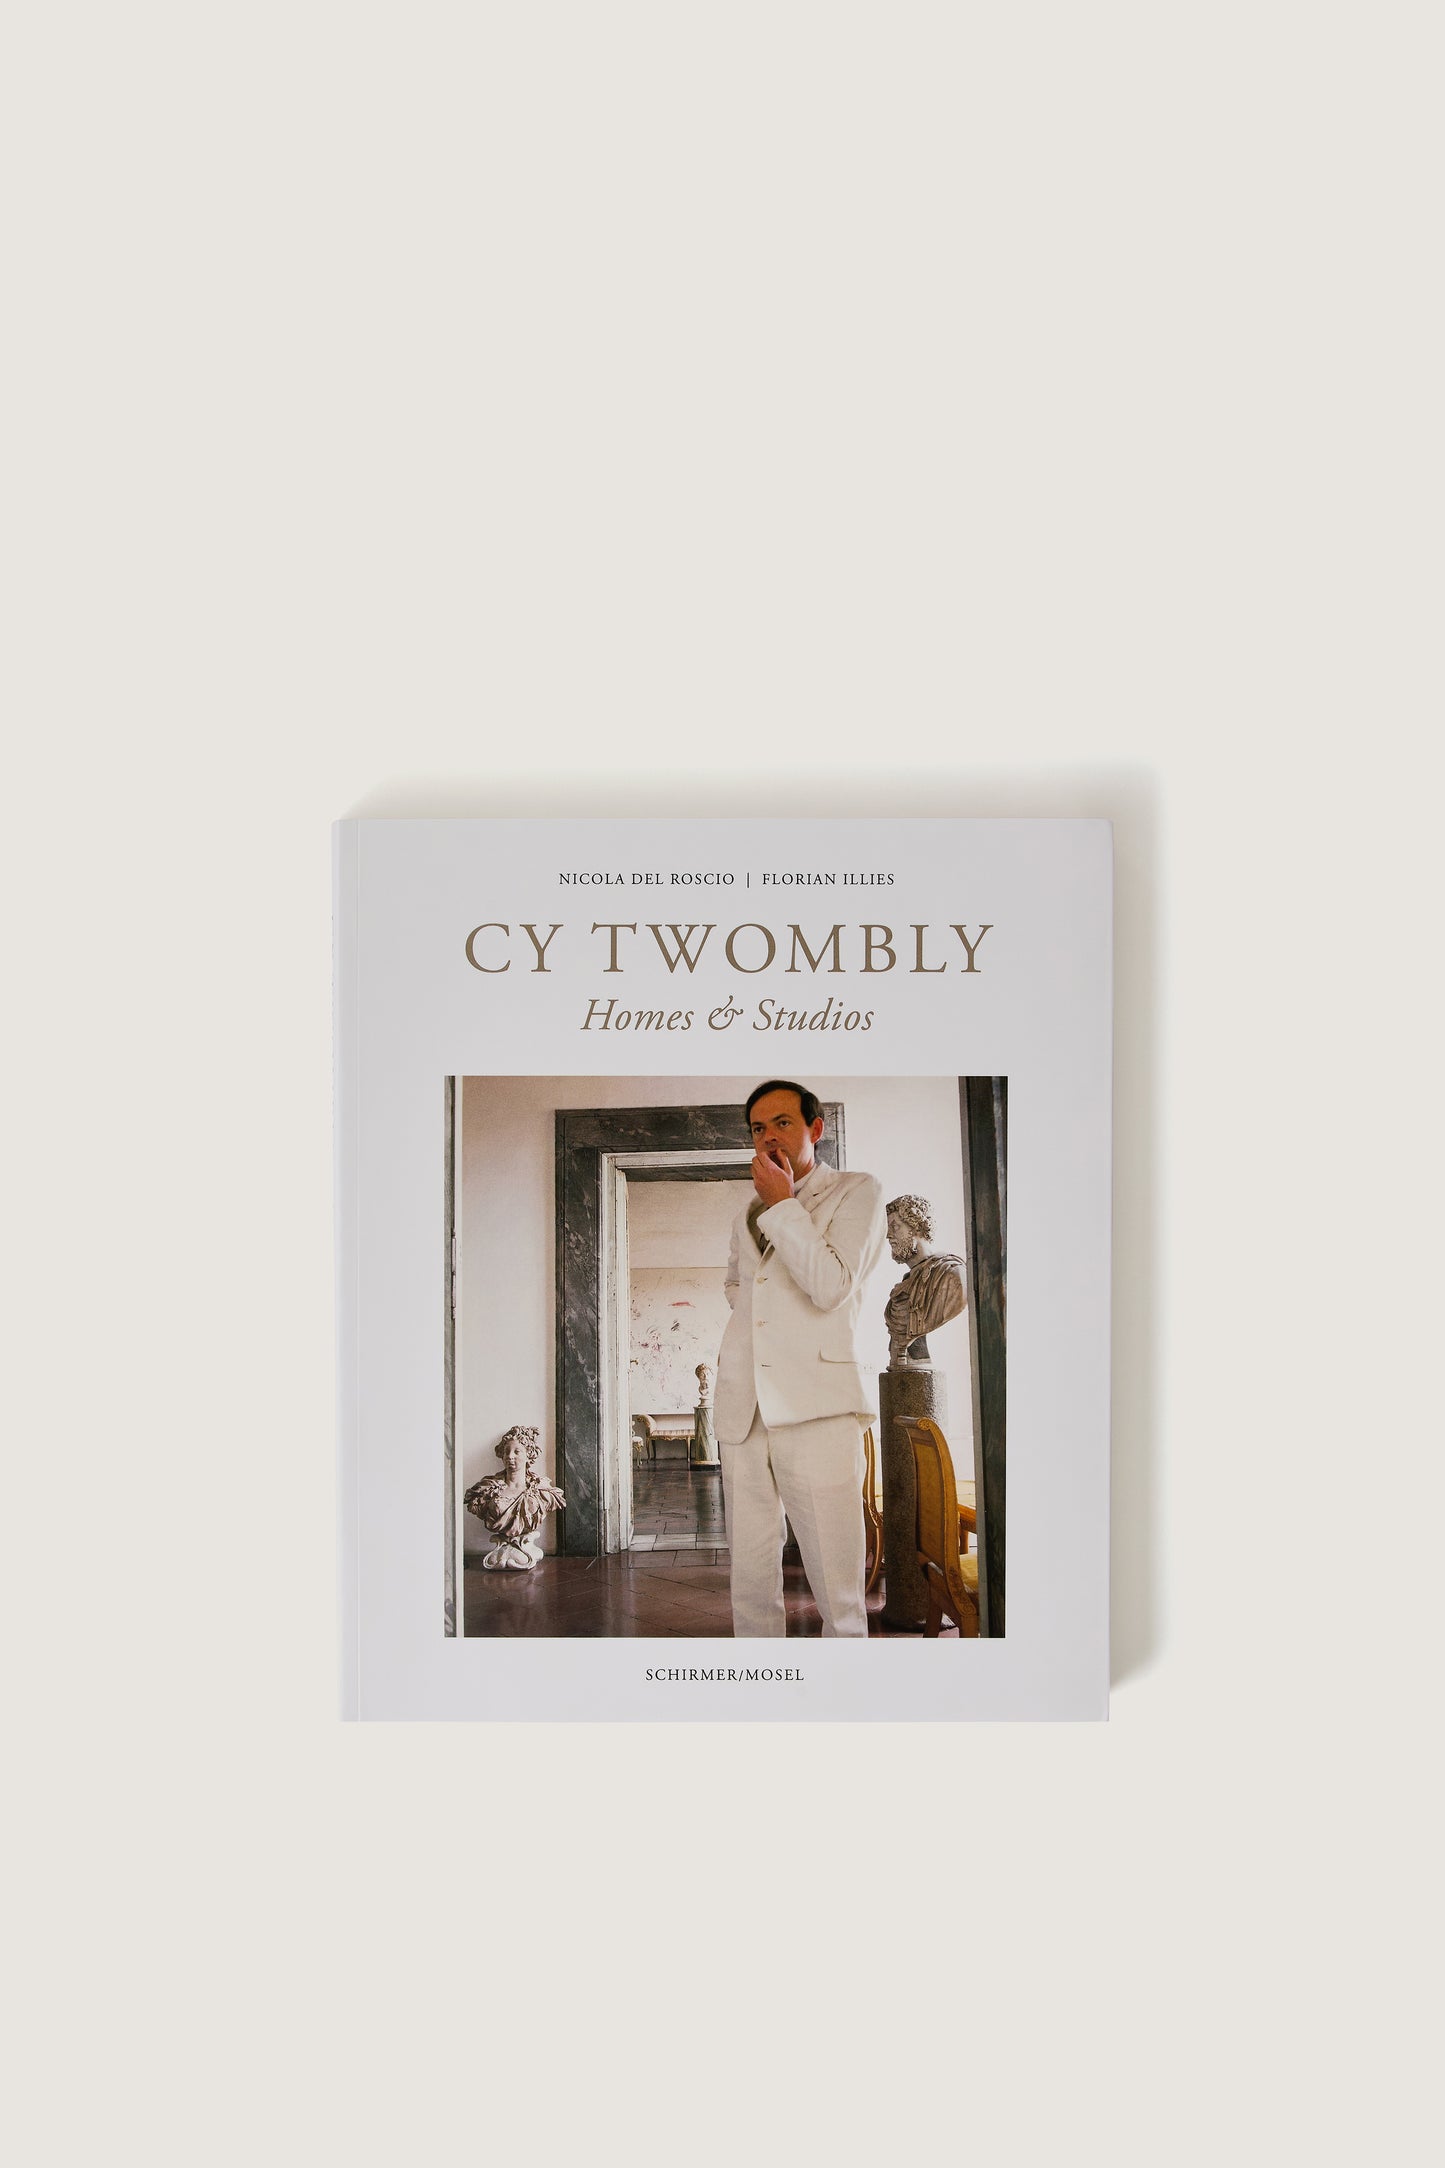 LIVRE "CY TWOMBLY, HOMES AND STUDIOS"